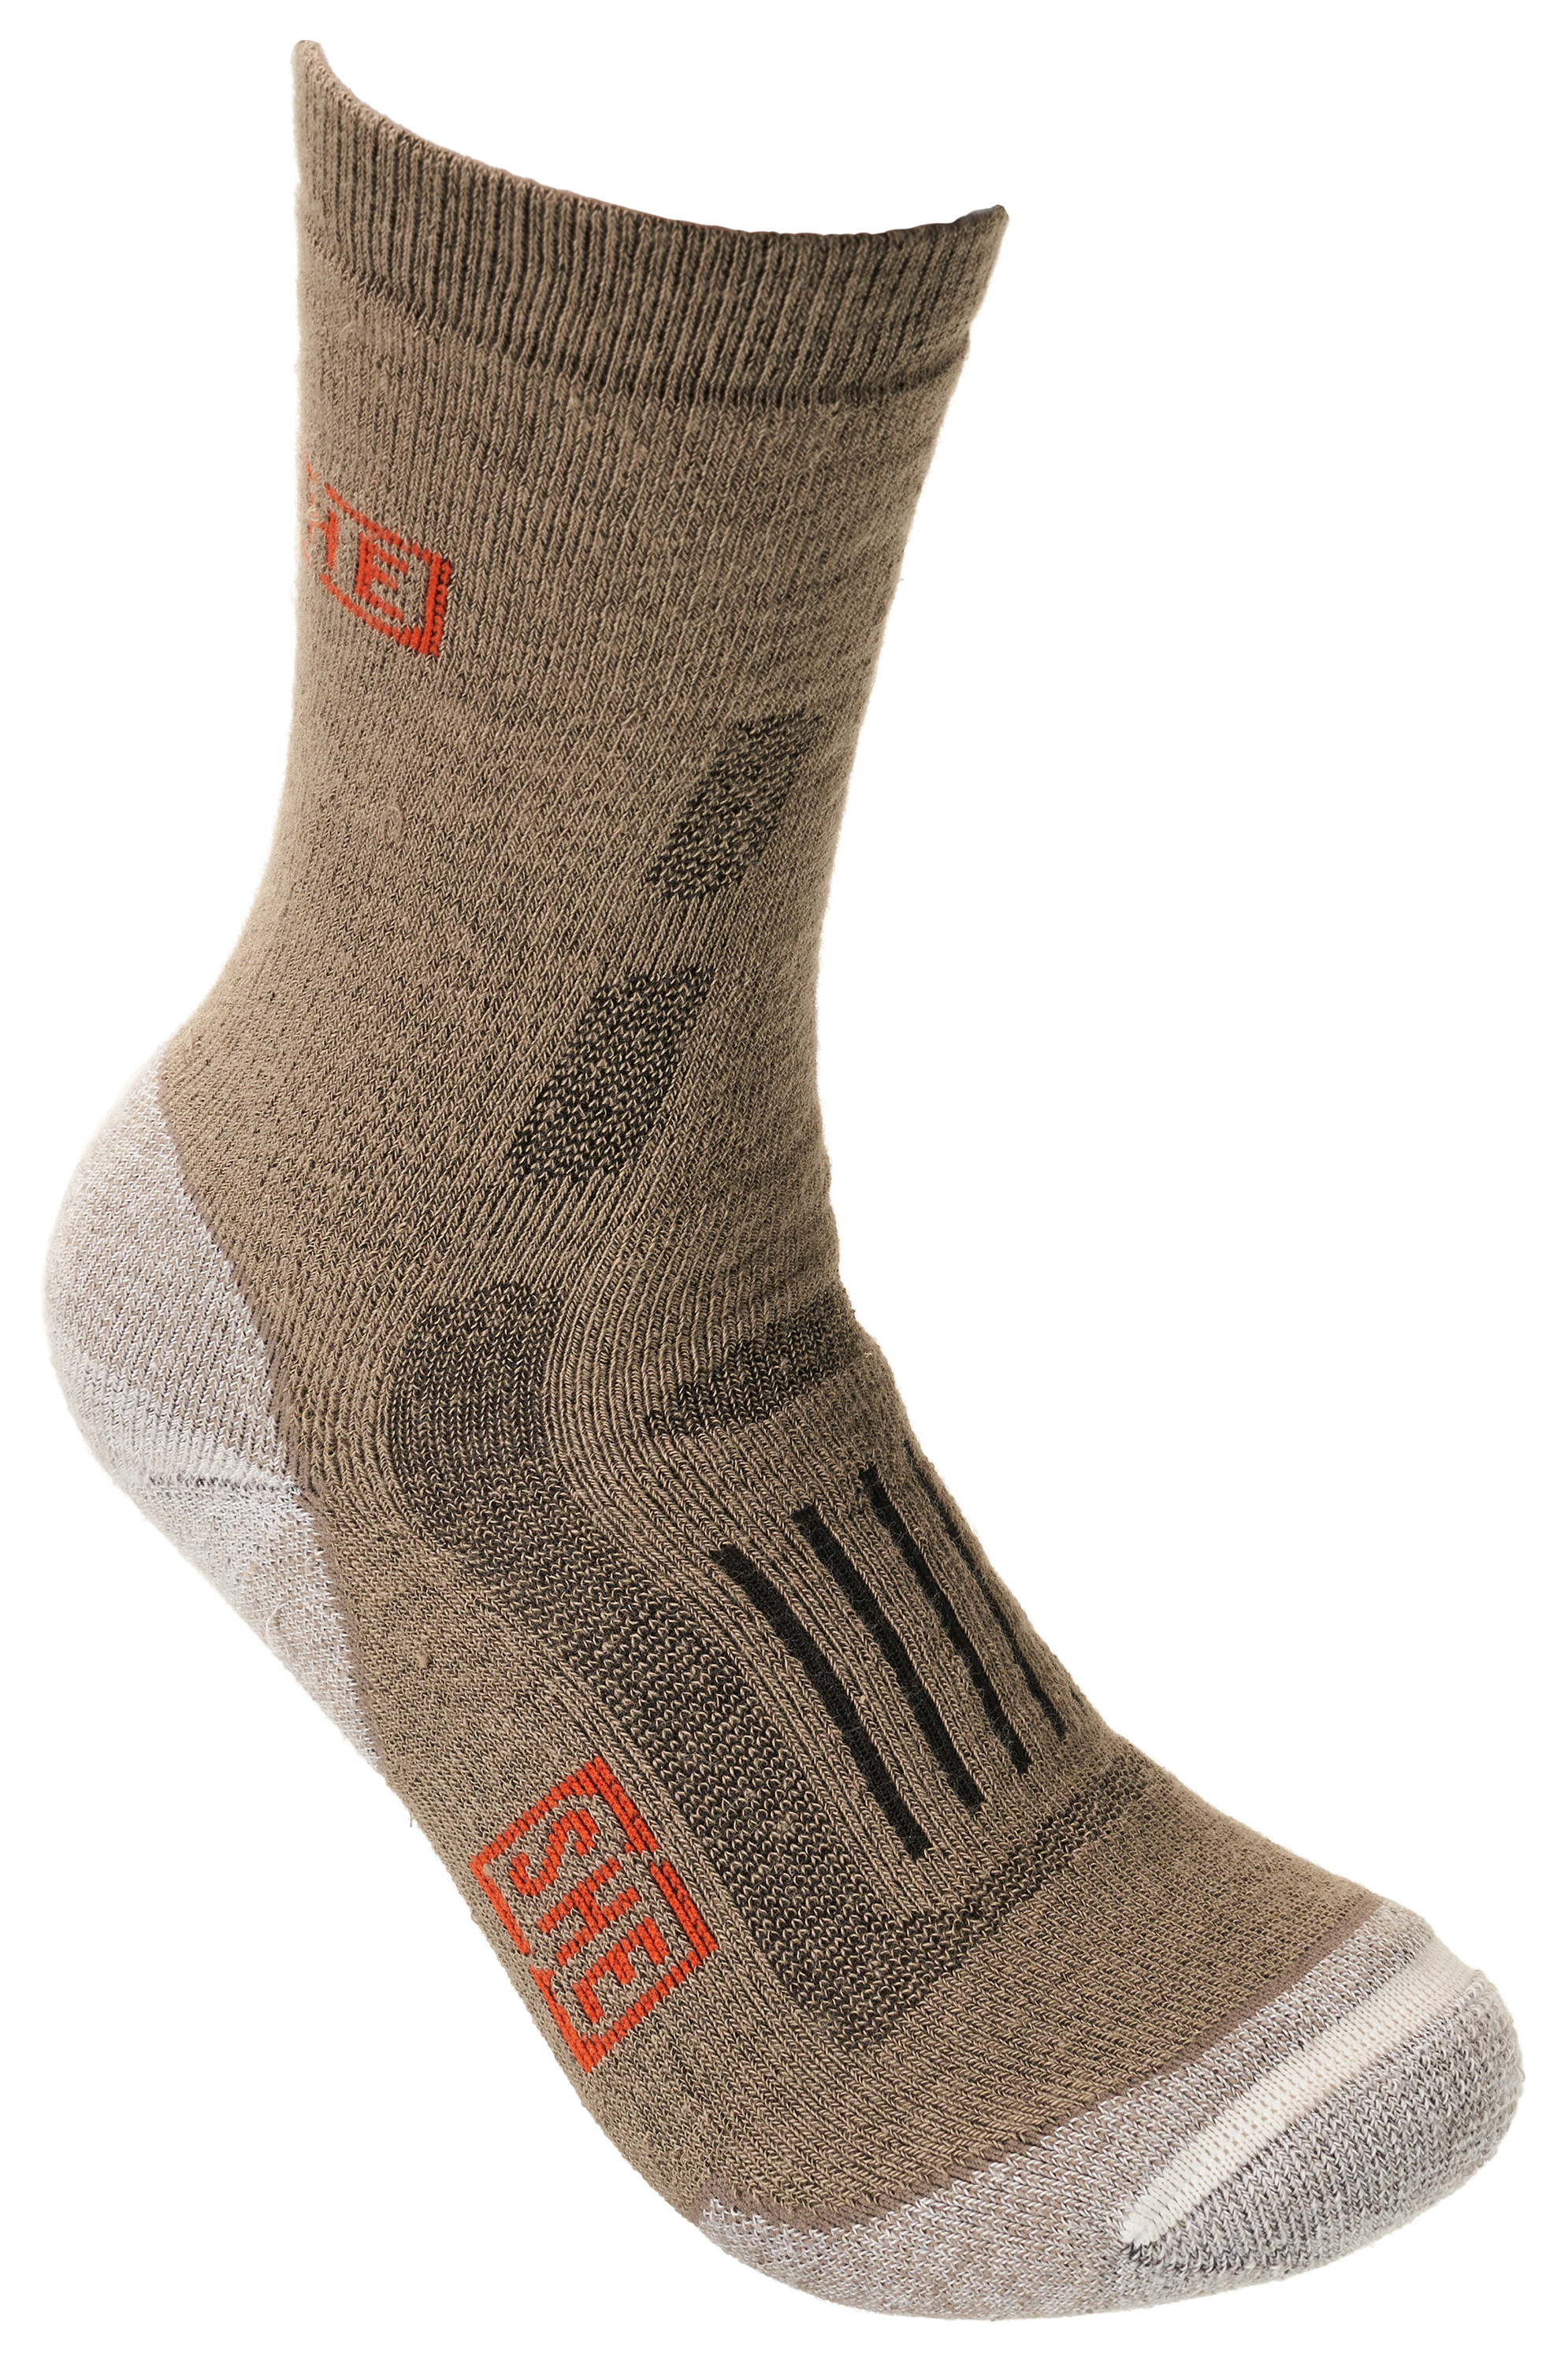 SHE Outdoor Pro Team Trekker Socks with Scent Control for Ladies - Brown/Silver - L